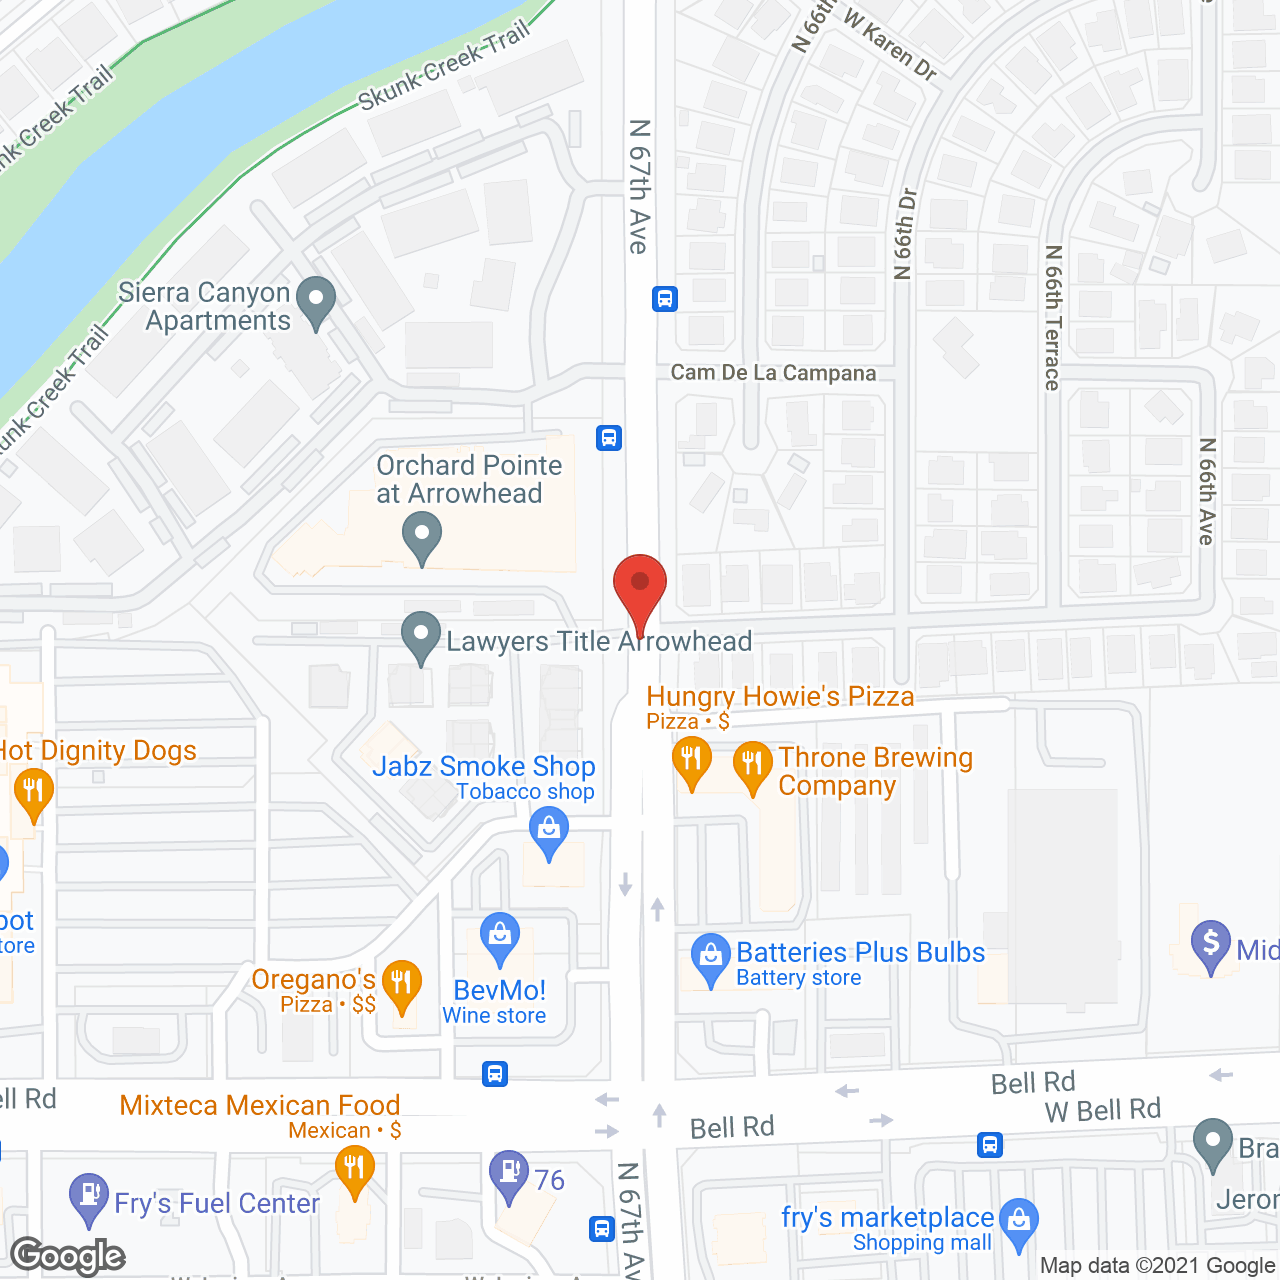 Orchard Pointe at Arrowhead in google map